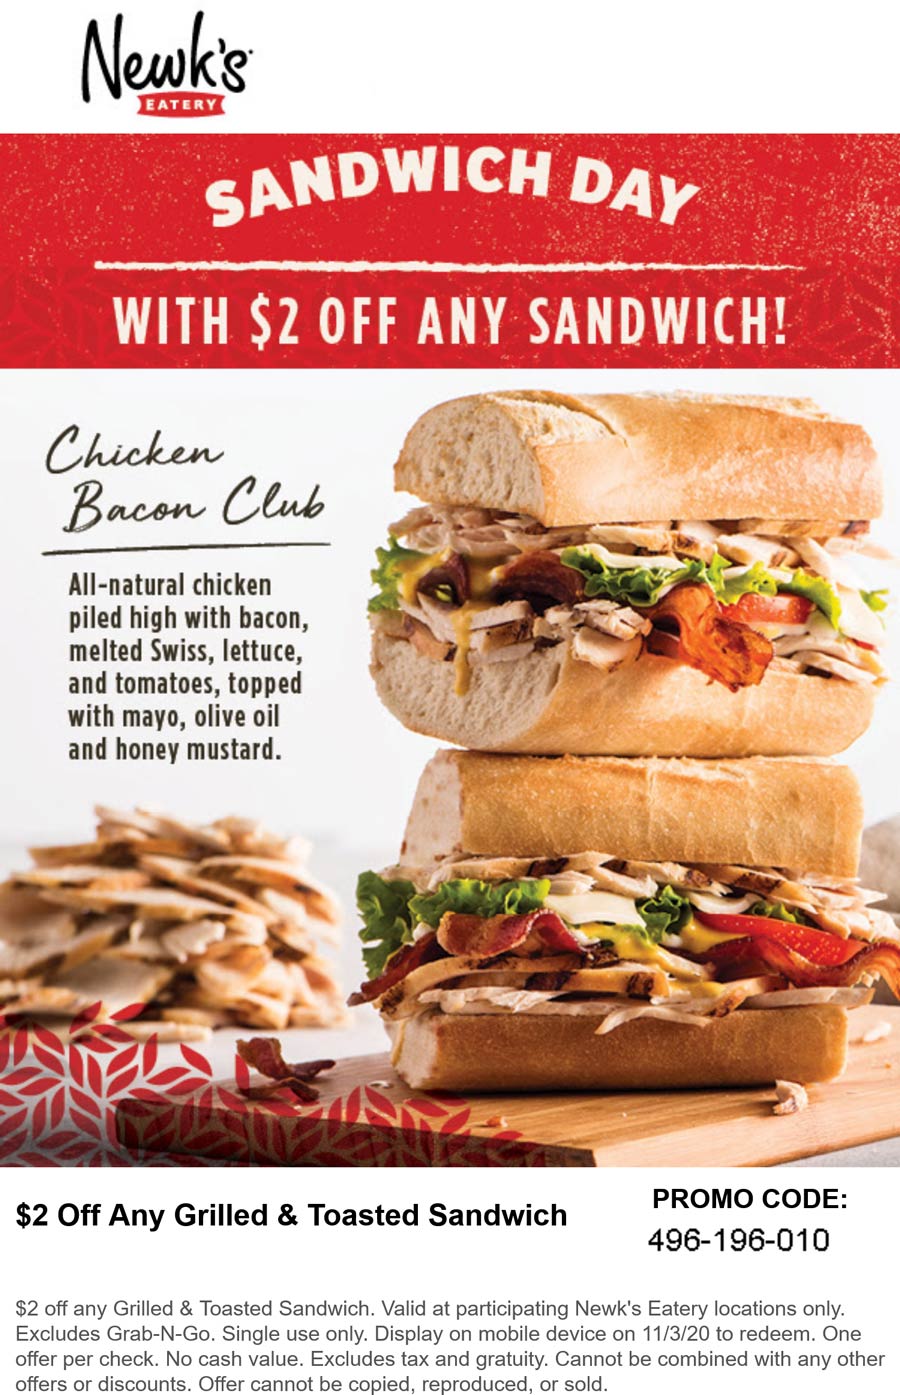 Newks Eatery restaurants Coupon  $2 off any sandwich today at Newks Eatery #newkseatery 